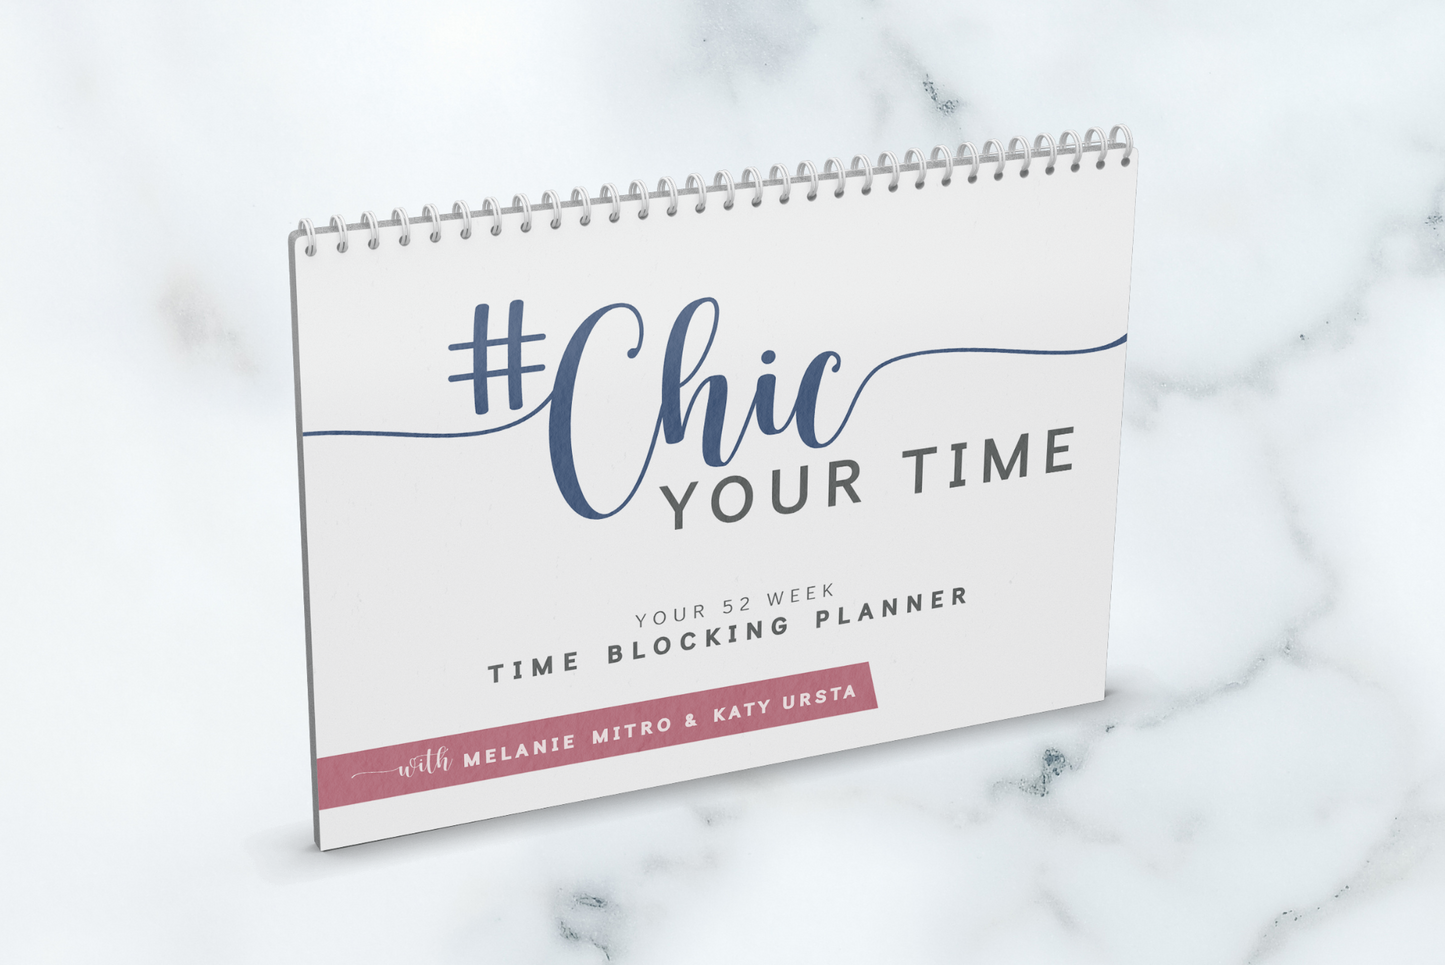 Chic Your Time 52 Week Time Blocking Planner